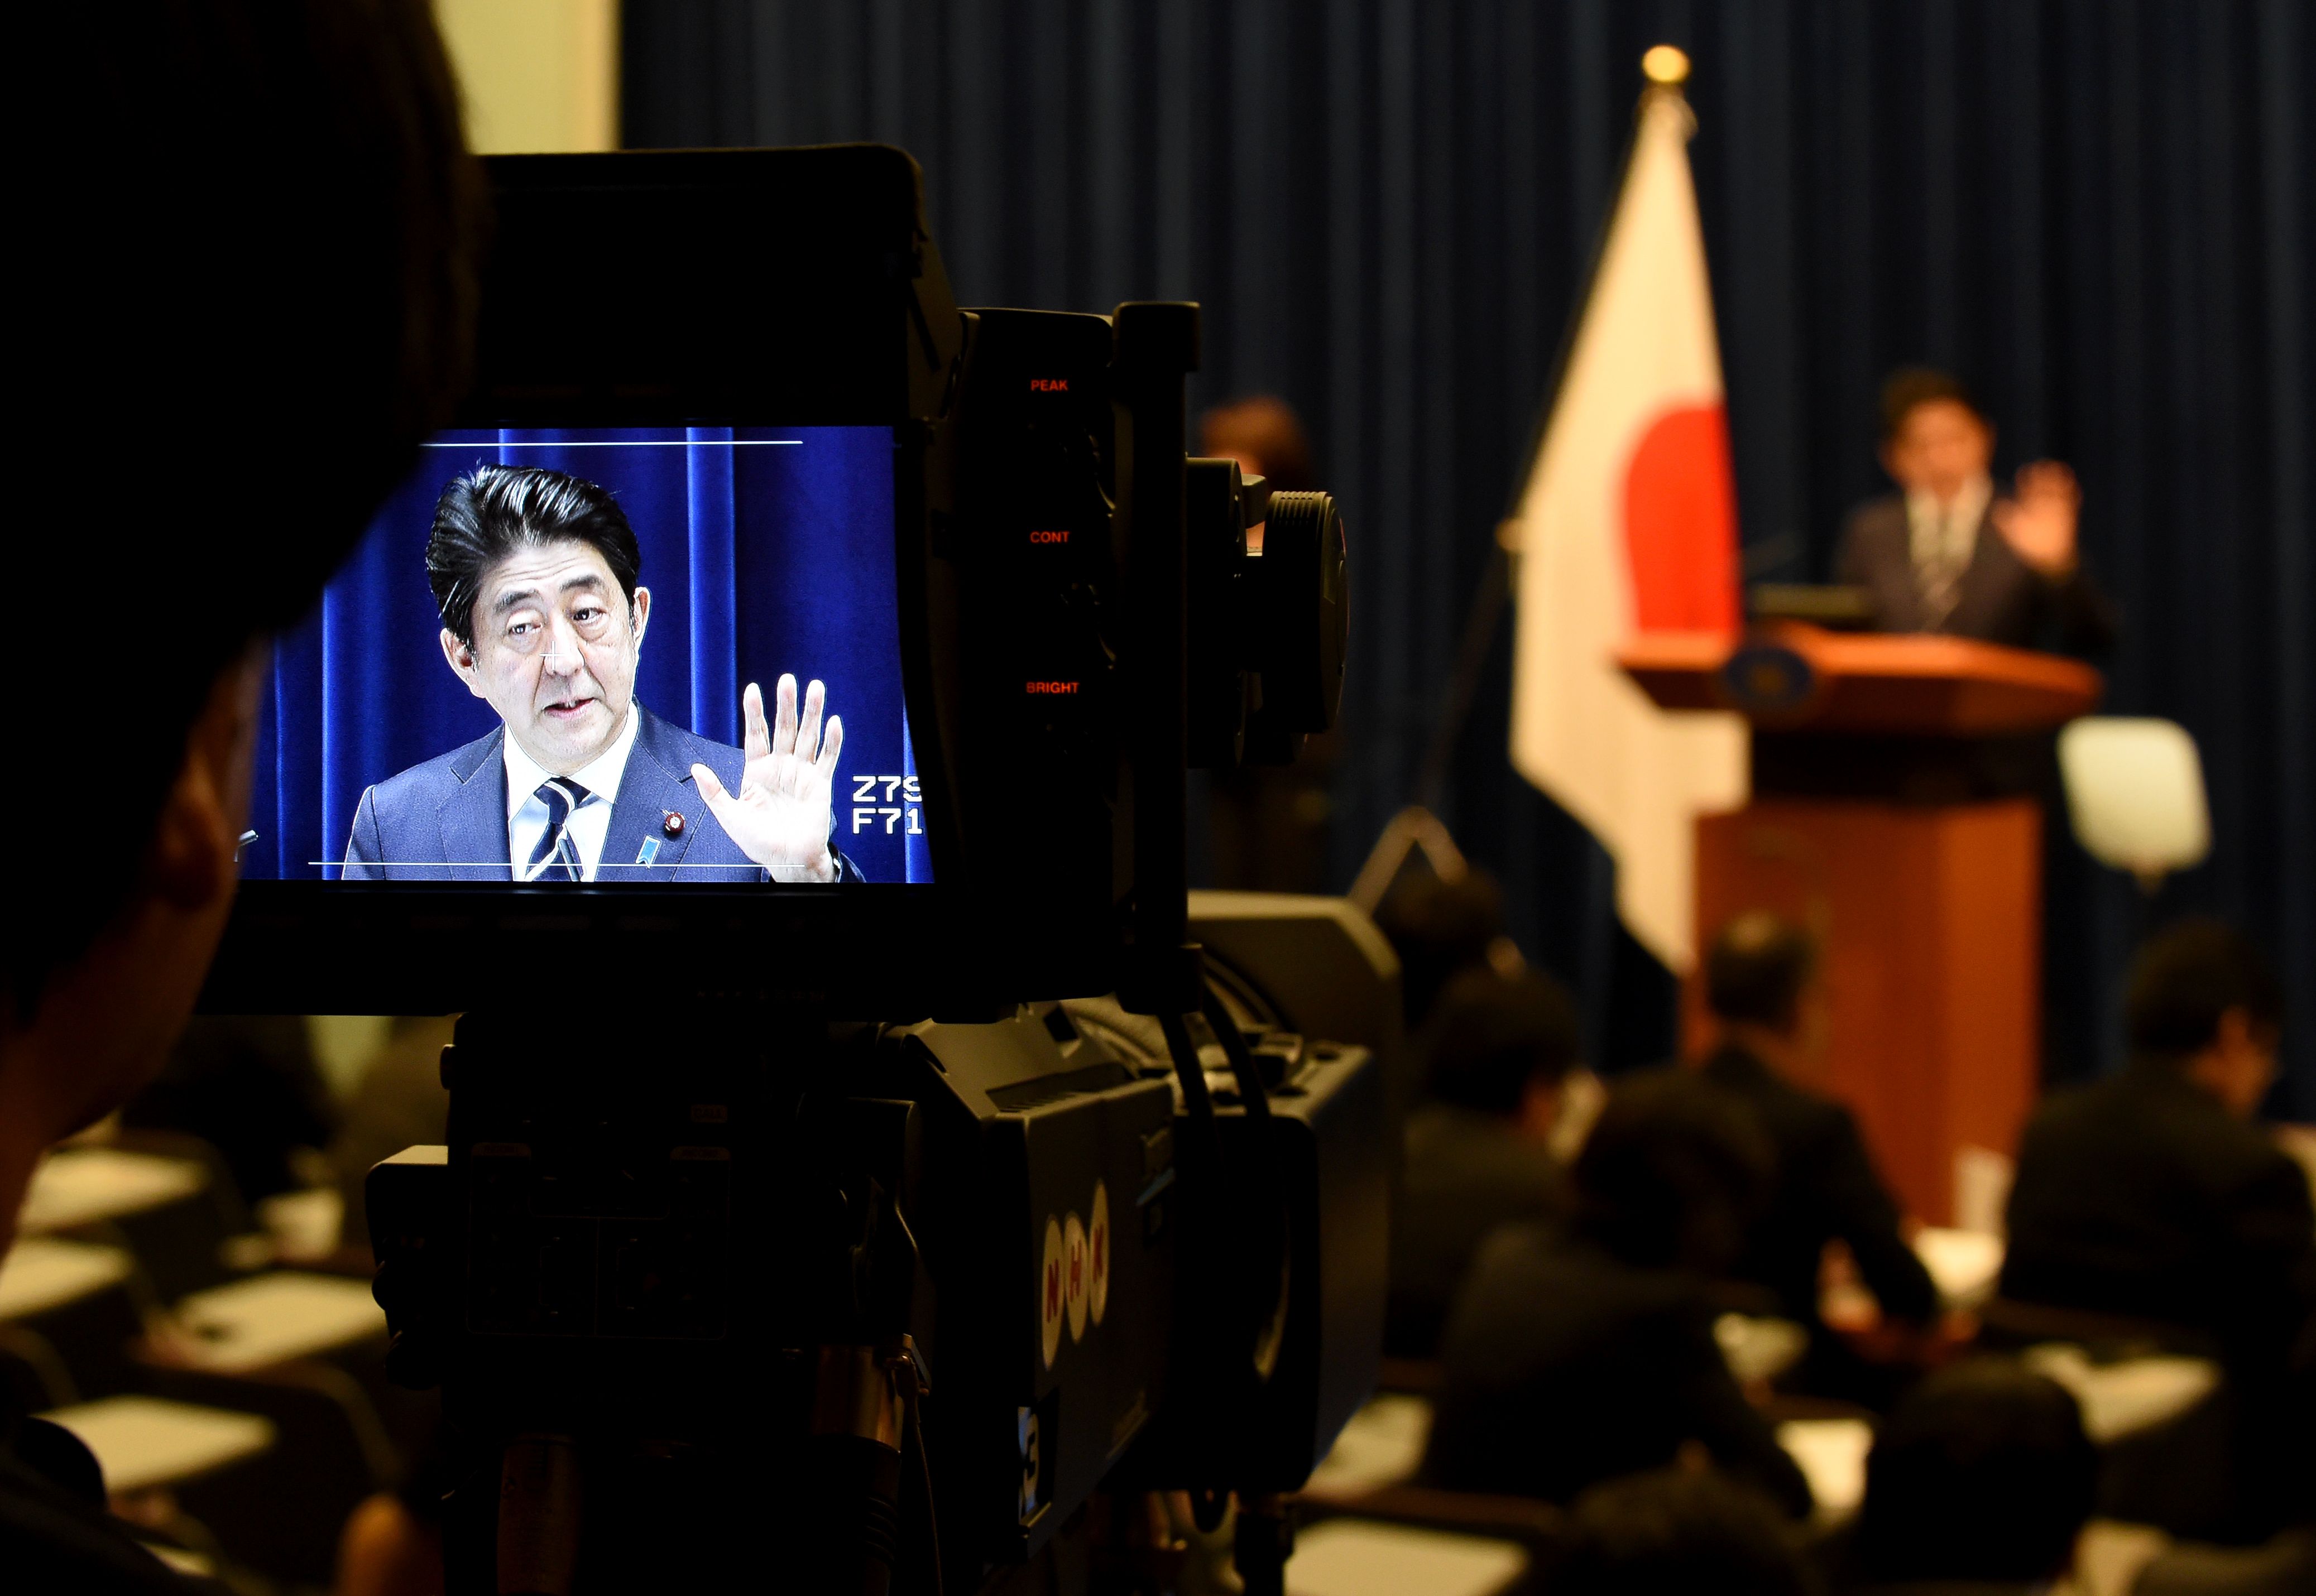 A cameraman focuses on Prime Minister Shinzo Abe during a news conference on Tuesday, when two divisive security laws punctured Japan's pacifist postwar defense profile. | AFP-JIJI